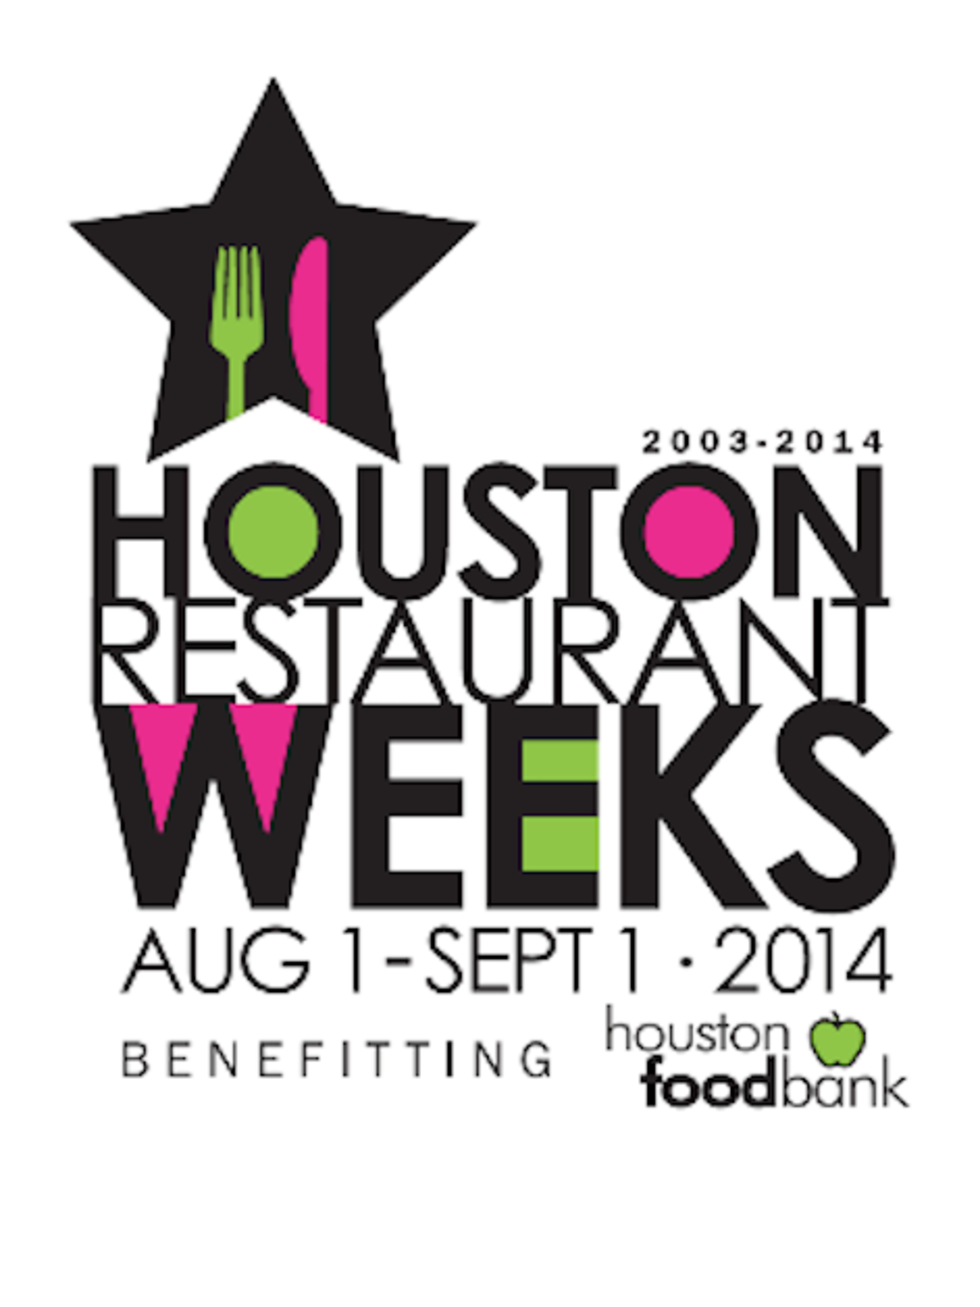 More than 150 menus are unveiled on Houston Restaurant Weeks website